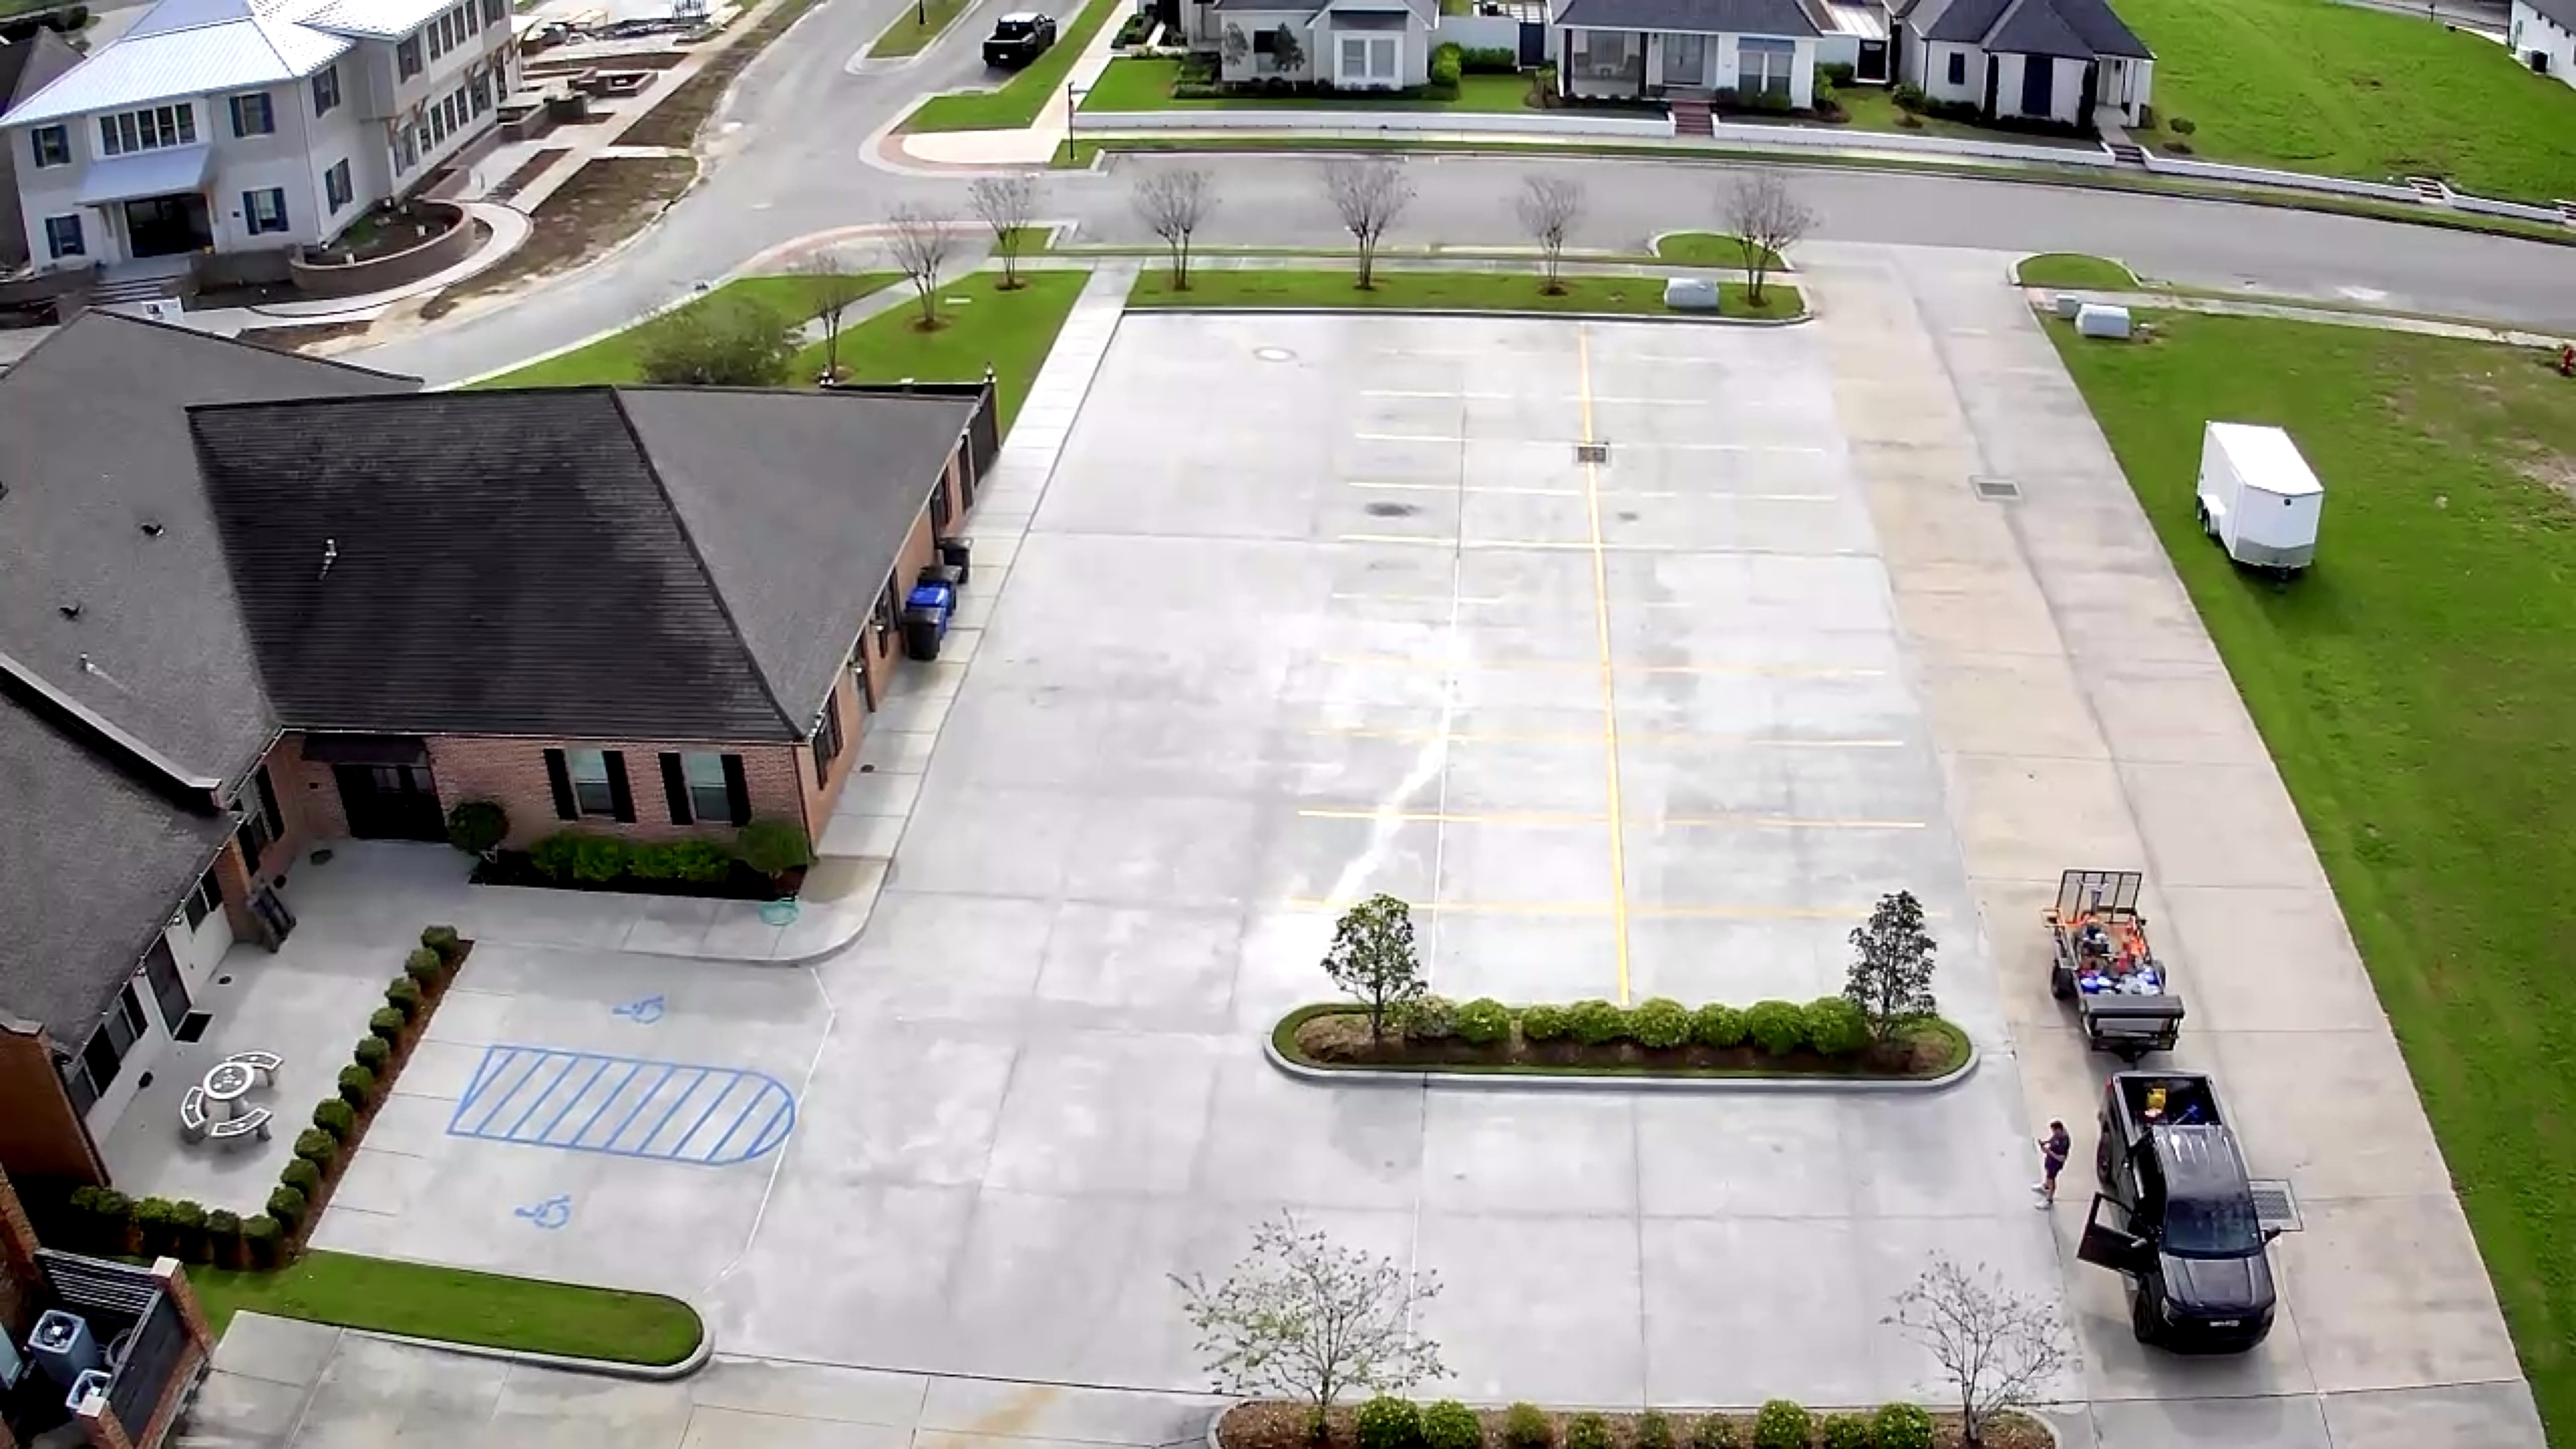 Mind-blowing Commercial Pressure washing in Thiboduax Louisiana 